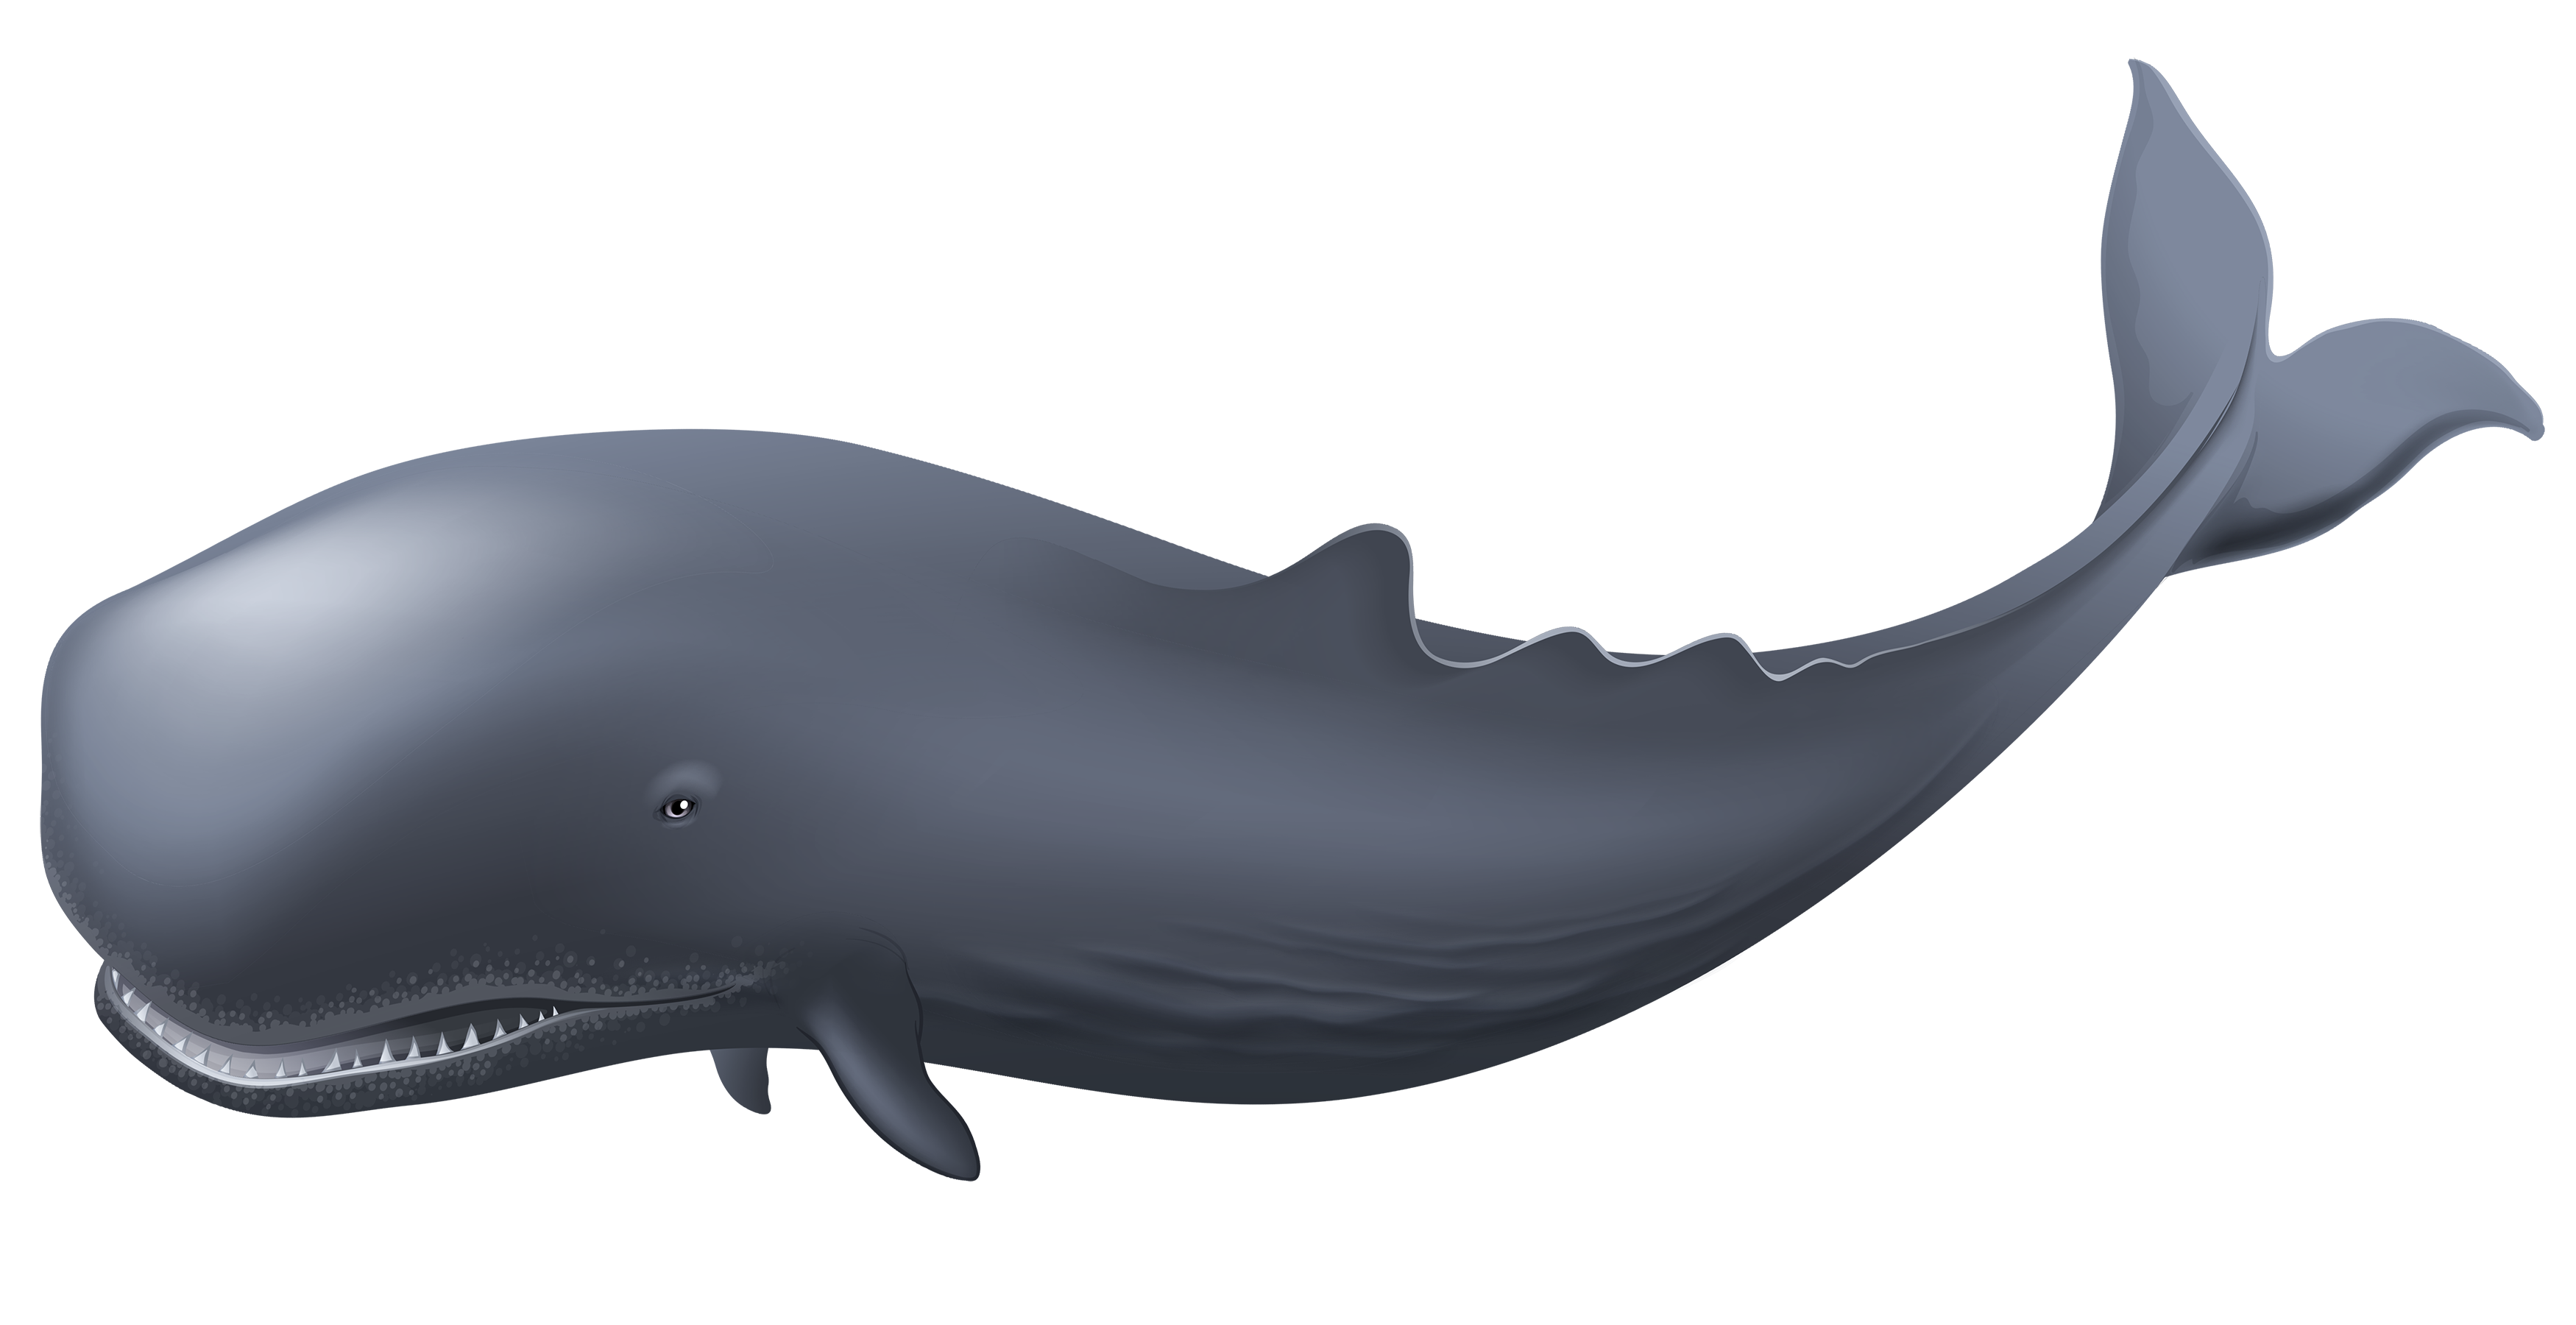 Killer Whale PNG Stock by Roy